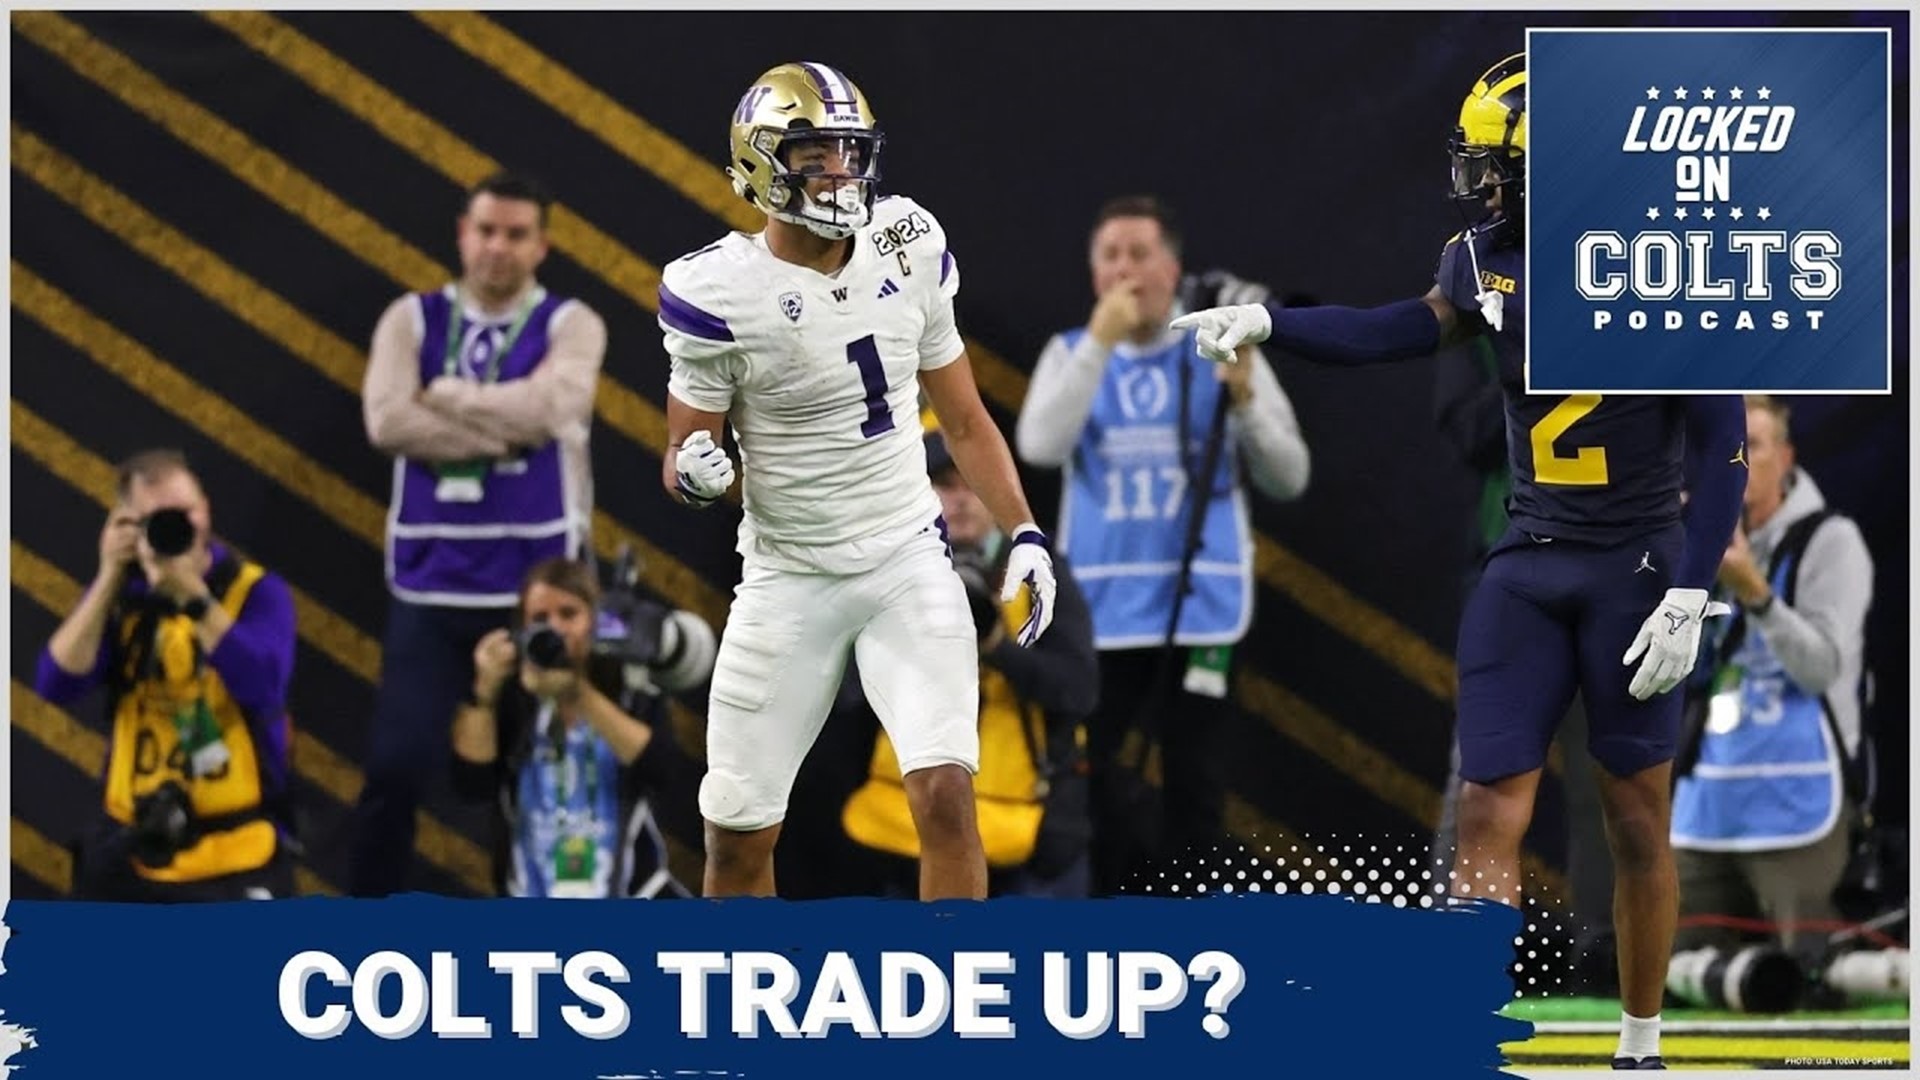 The Indianapolis Colts' roster is near full capacity, so is now the time for a splashy trade-up?